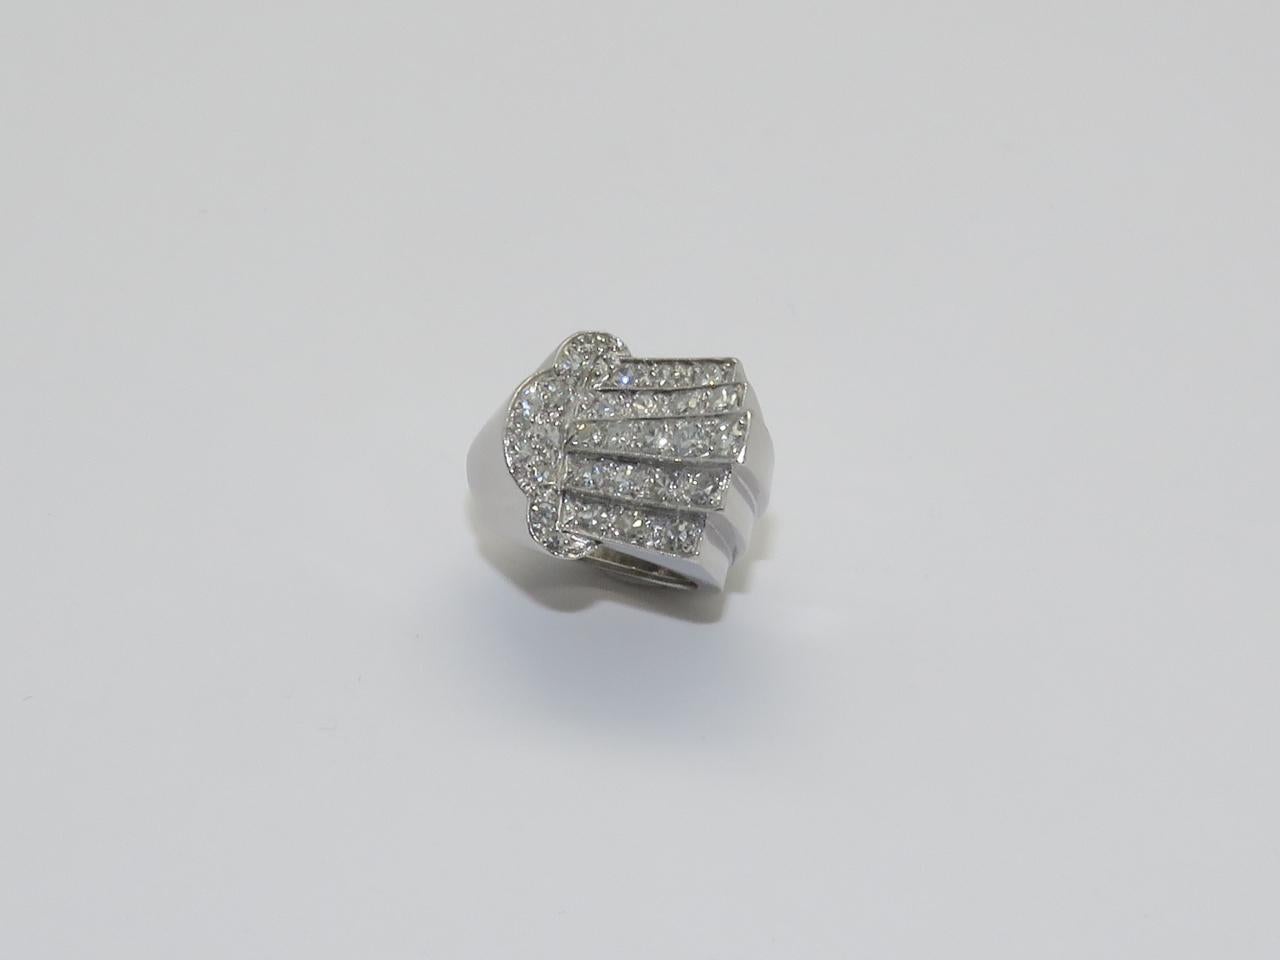 Total Weight Diamond: 2 Ct approximately

Ring Size 4 1/2

Measurements:
Height: 1.18 in ( 3 cm )     Lenght: 0.91 in ( 2.30 cm )     Width: 0.75 in ( 1.90 cm )     Weight: 12.80 grams